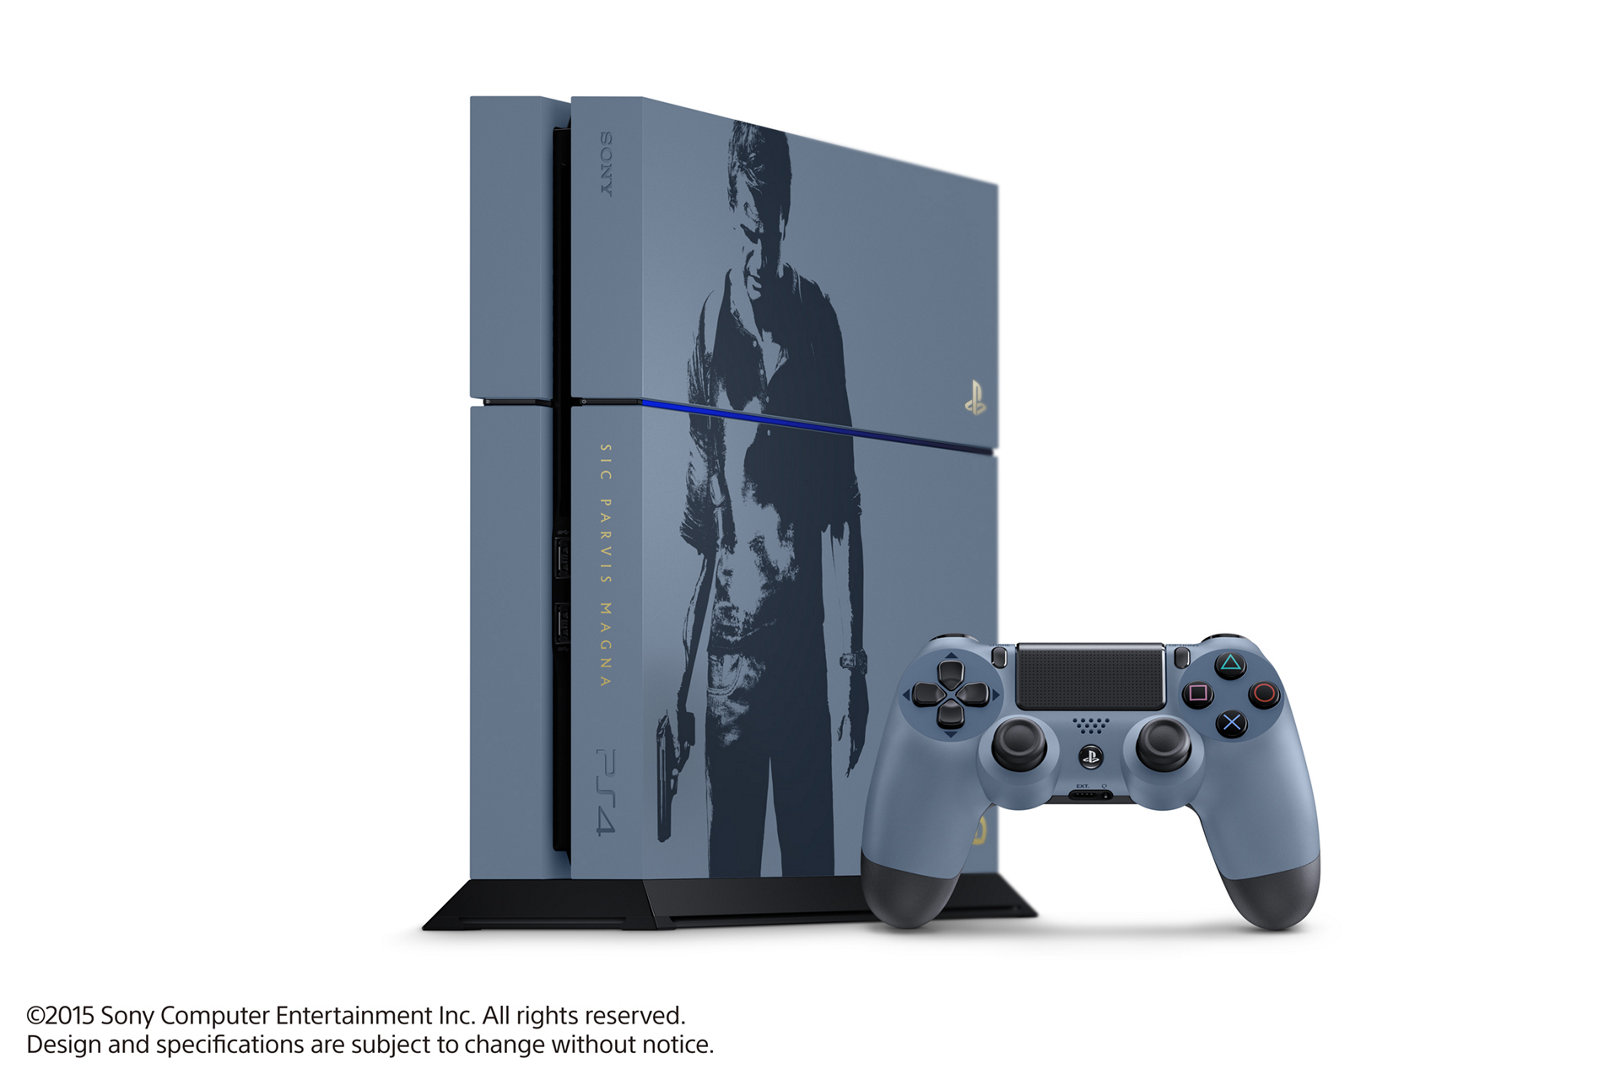 Limited Edition Uncharted 4 PS4 Bundle Launches April